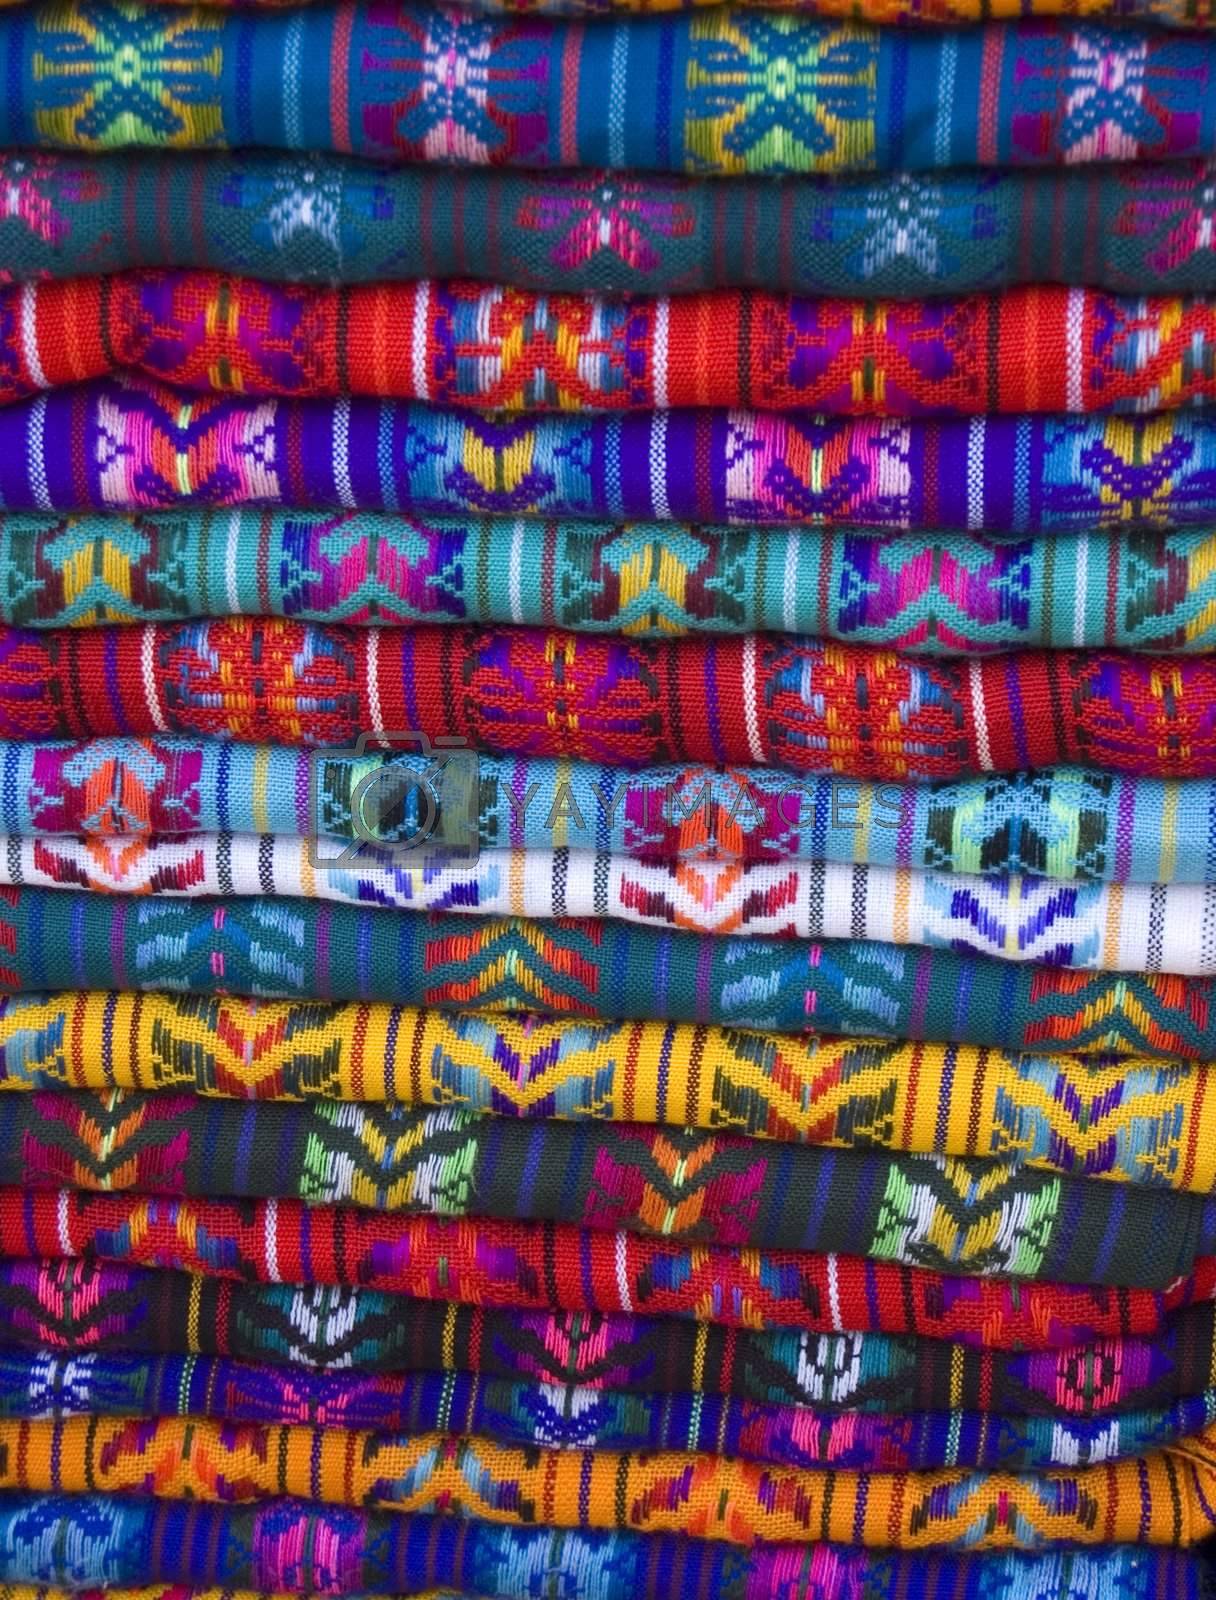 Royalty free image of Mayan Blankets 2 by jorgeinthewater